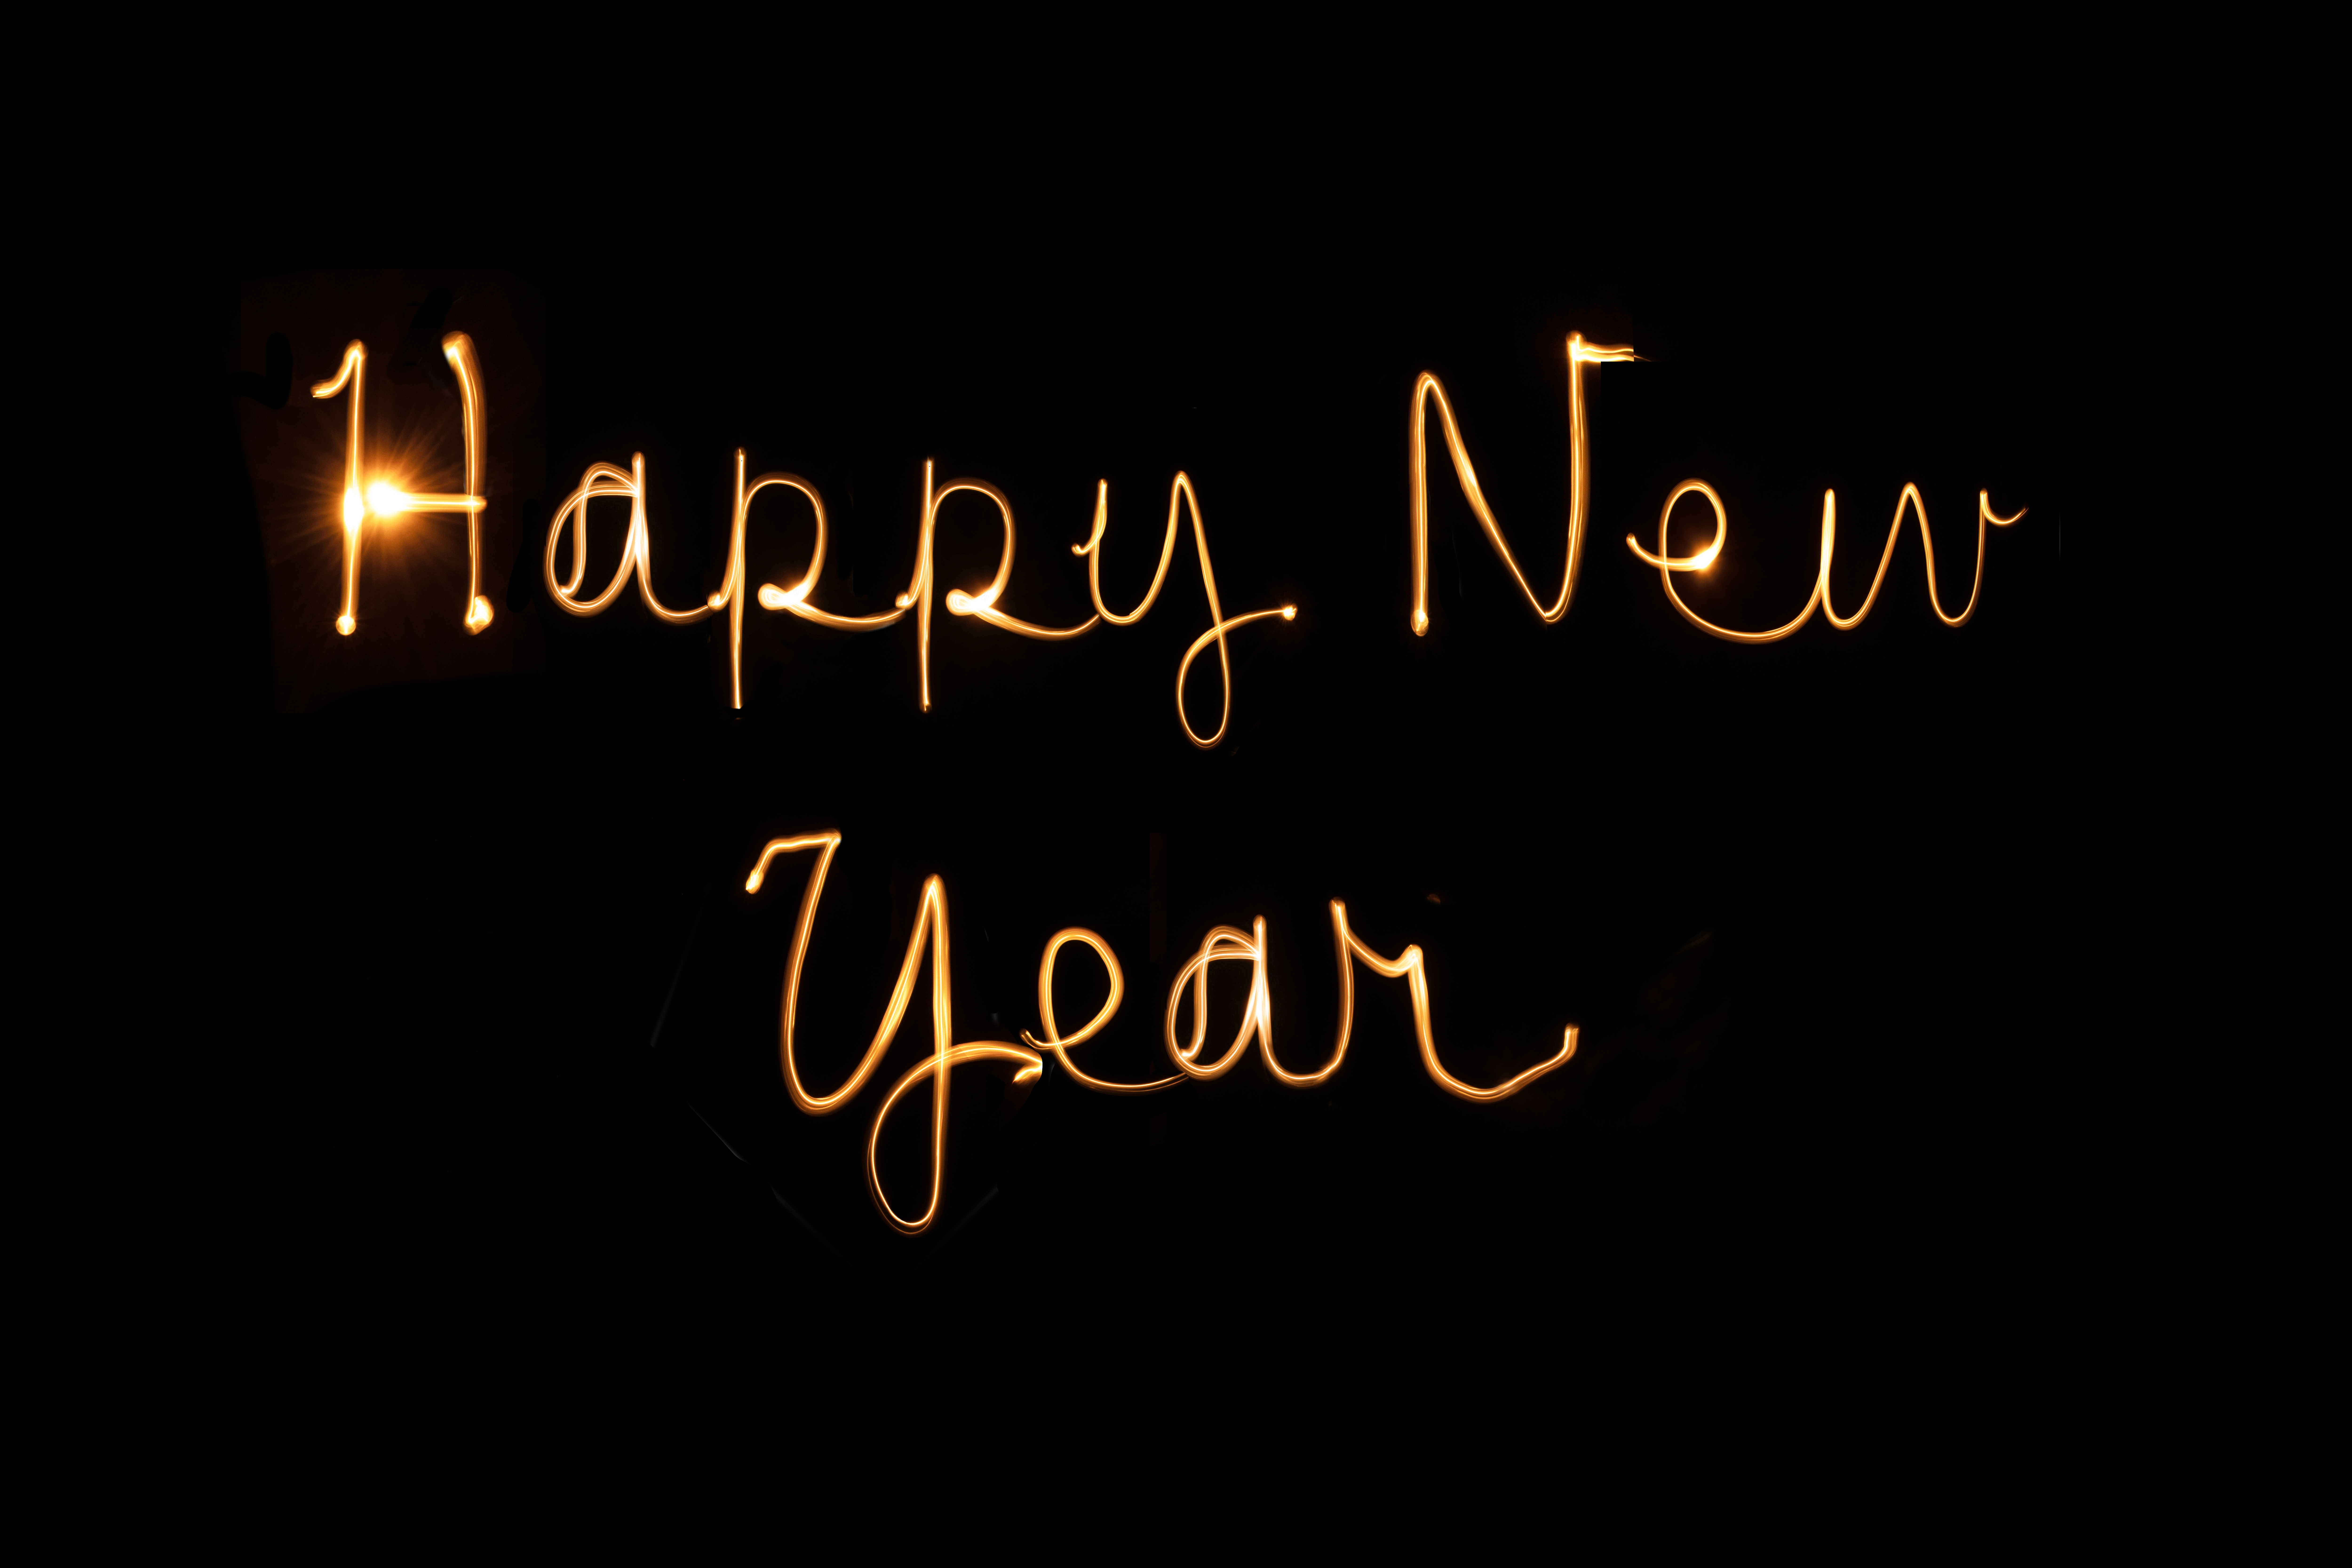 HD wallpaper, January, Holidays, 8K, Happy New Year, Hand Written, Golden Letters, Black Background, Greetings, Sparklers, 5K